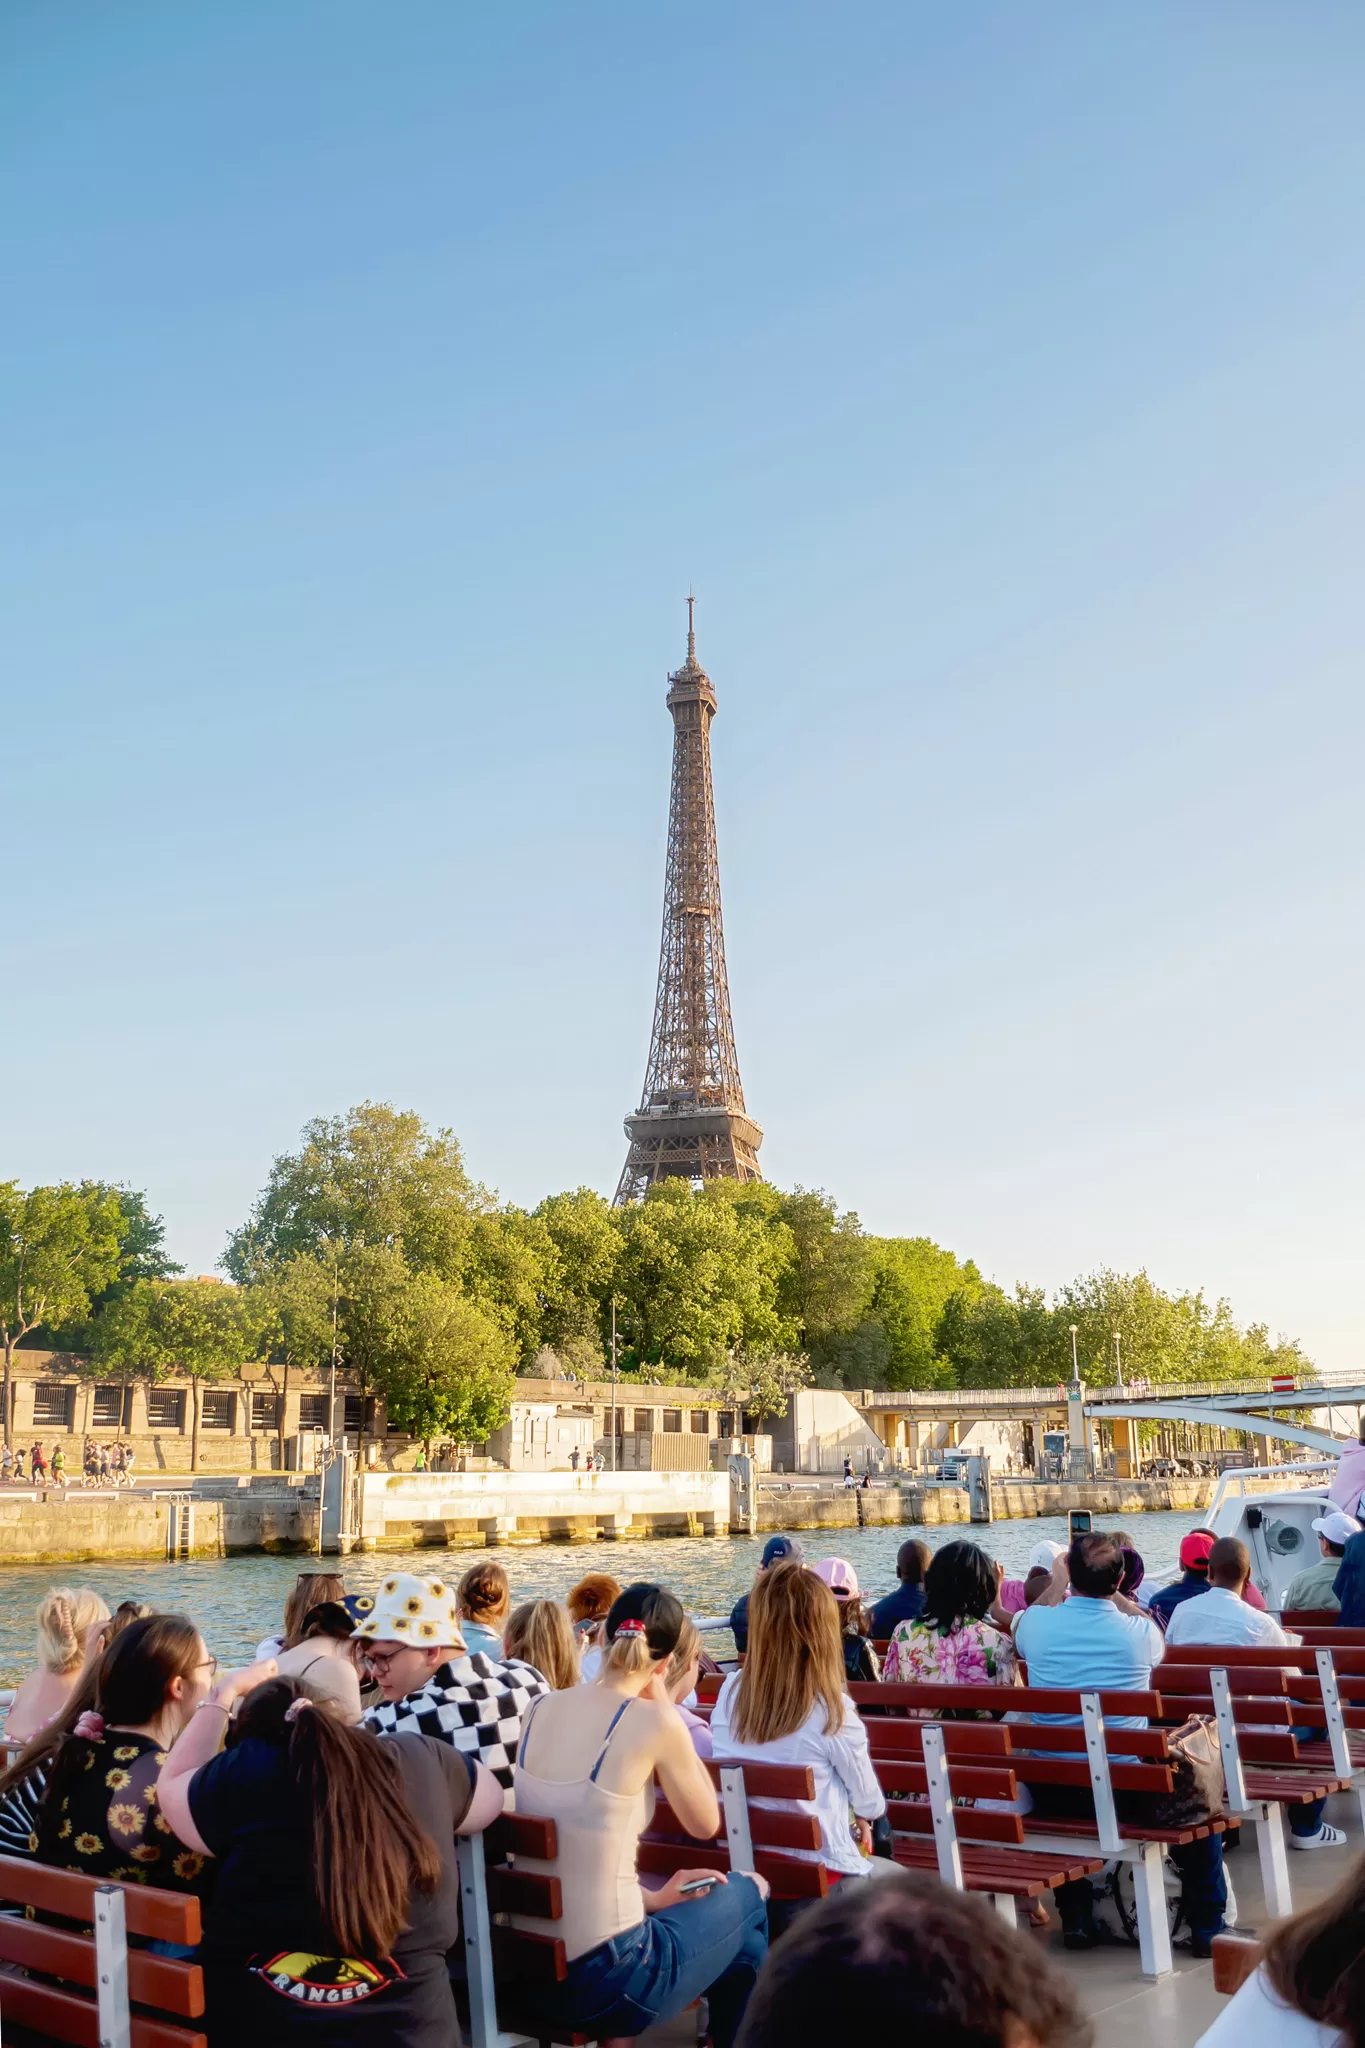 View of the Eiffel Tower from a Paris Boat Tour